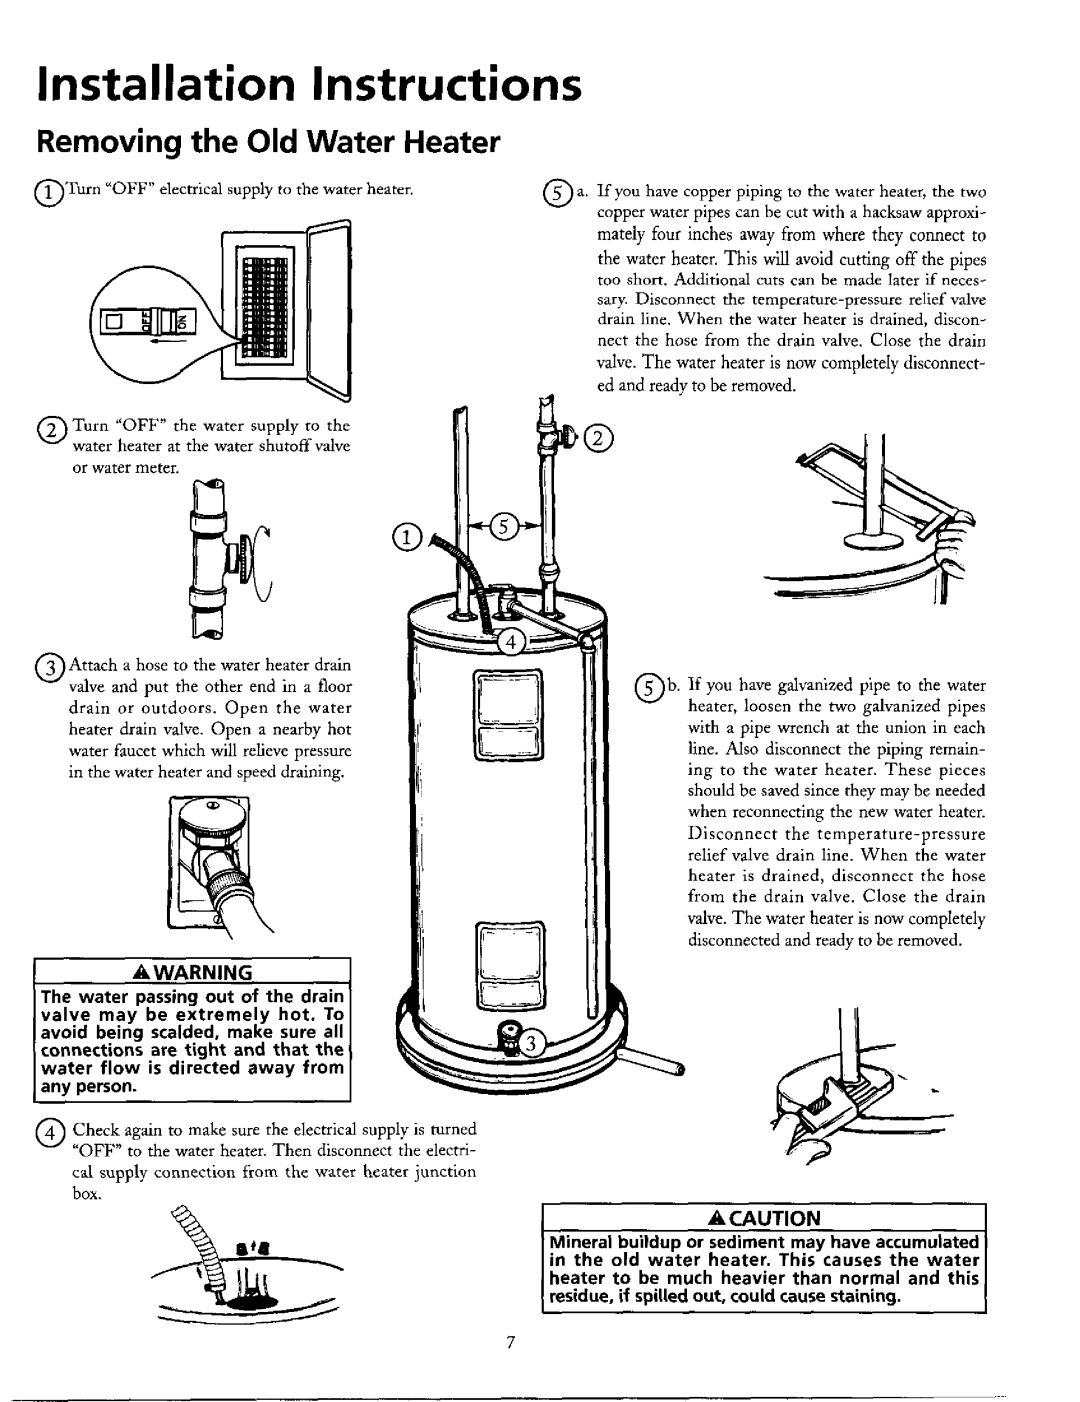 Maytag HE21282PC, HE21250PC operating instructions Removing the Old Water Heater, Installation Instructions 